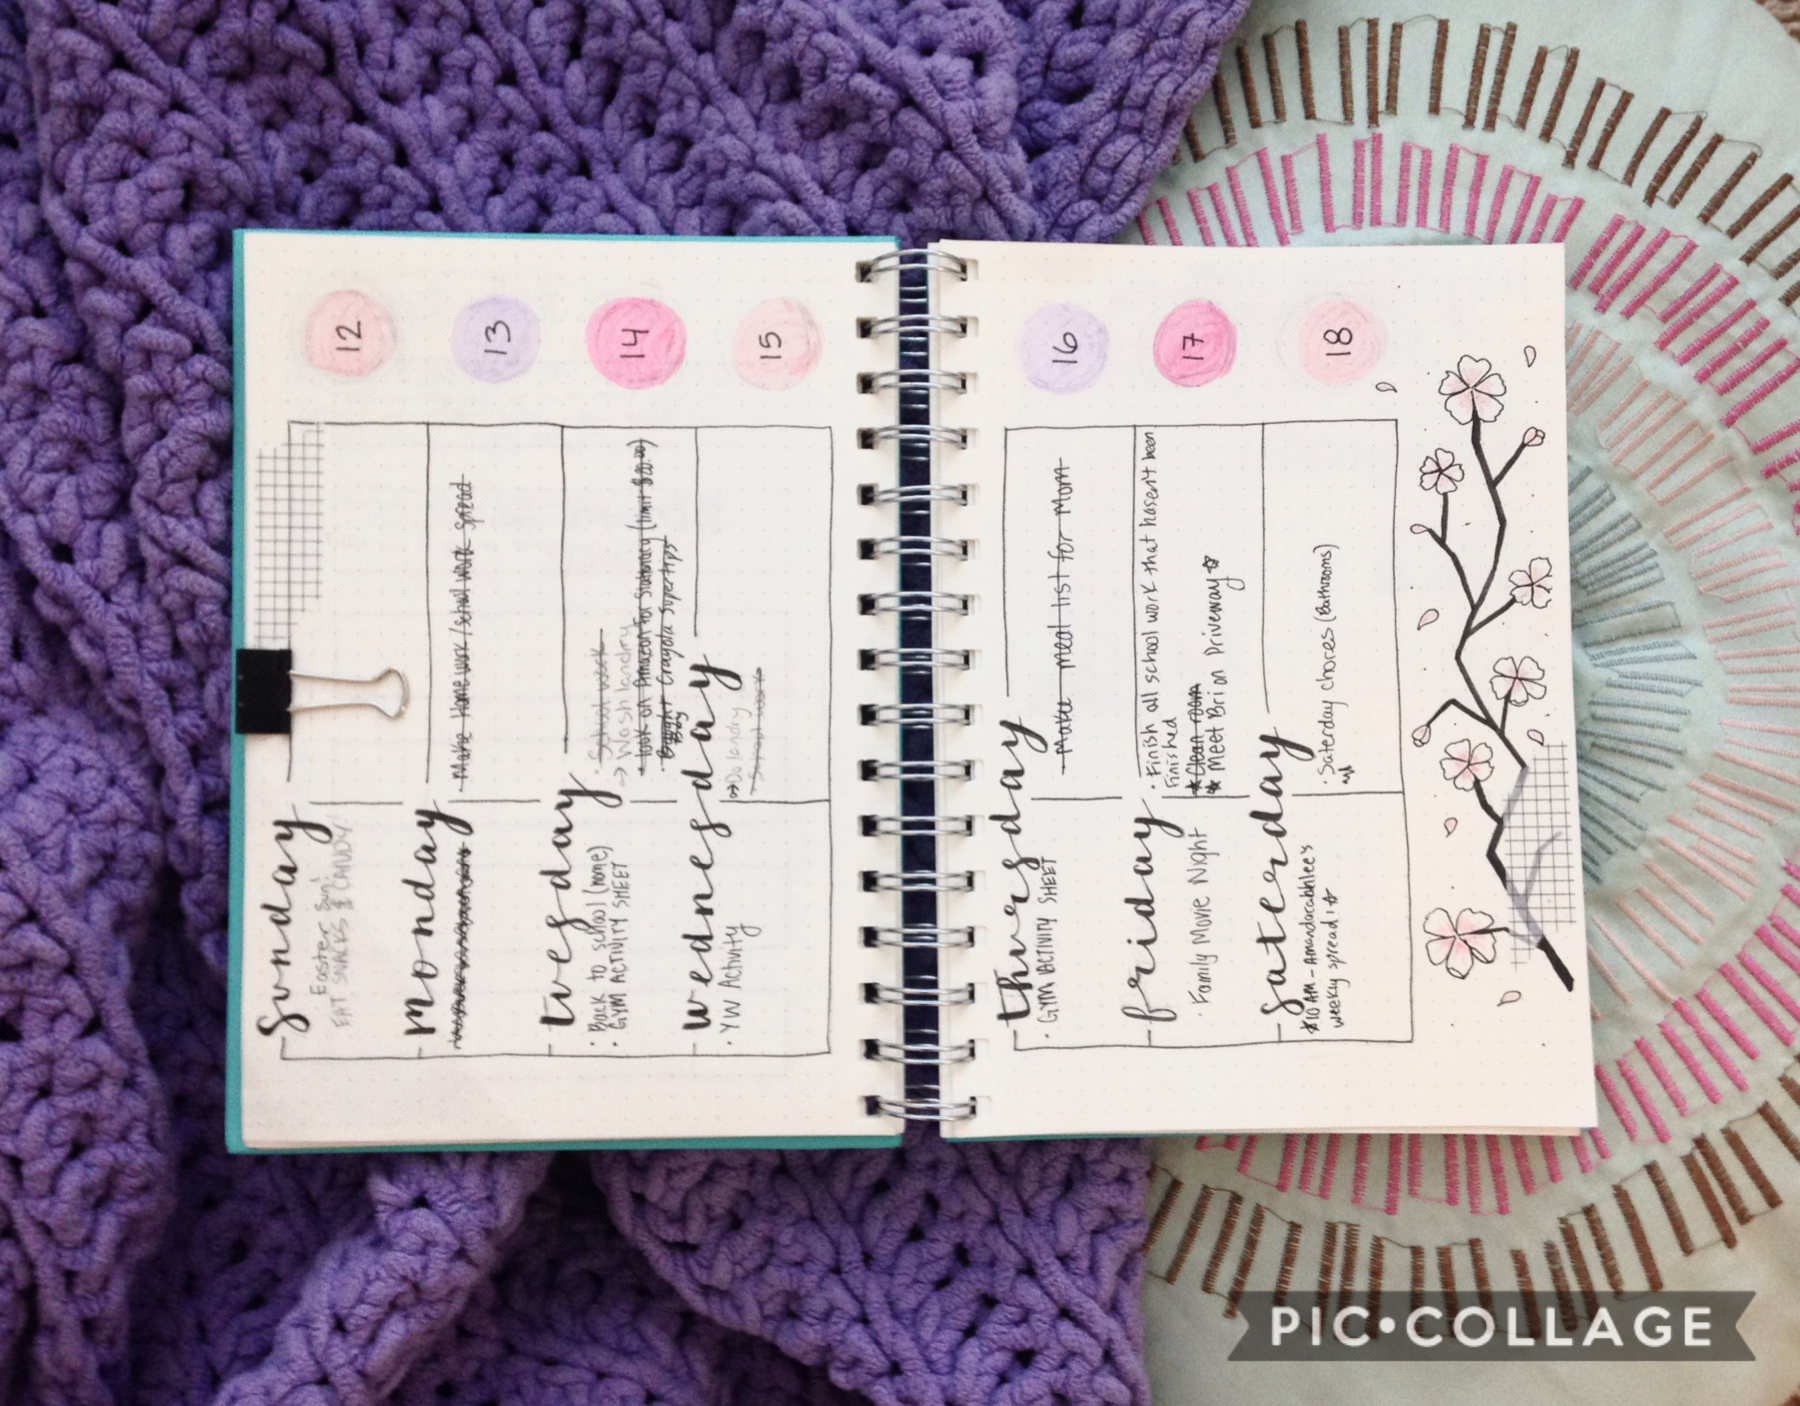 My recent weekly has been not too filled up I have a homework spread that has been packed recently. Am I the only one who feels like they have given us more work now that we are home? Post yes or no in the comments!